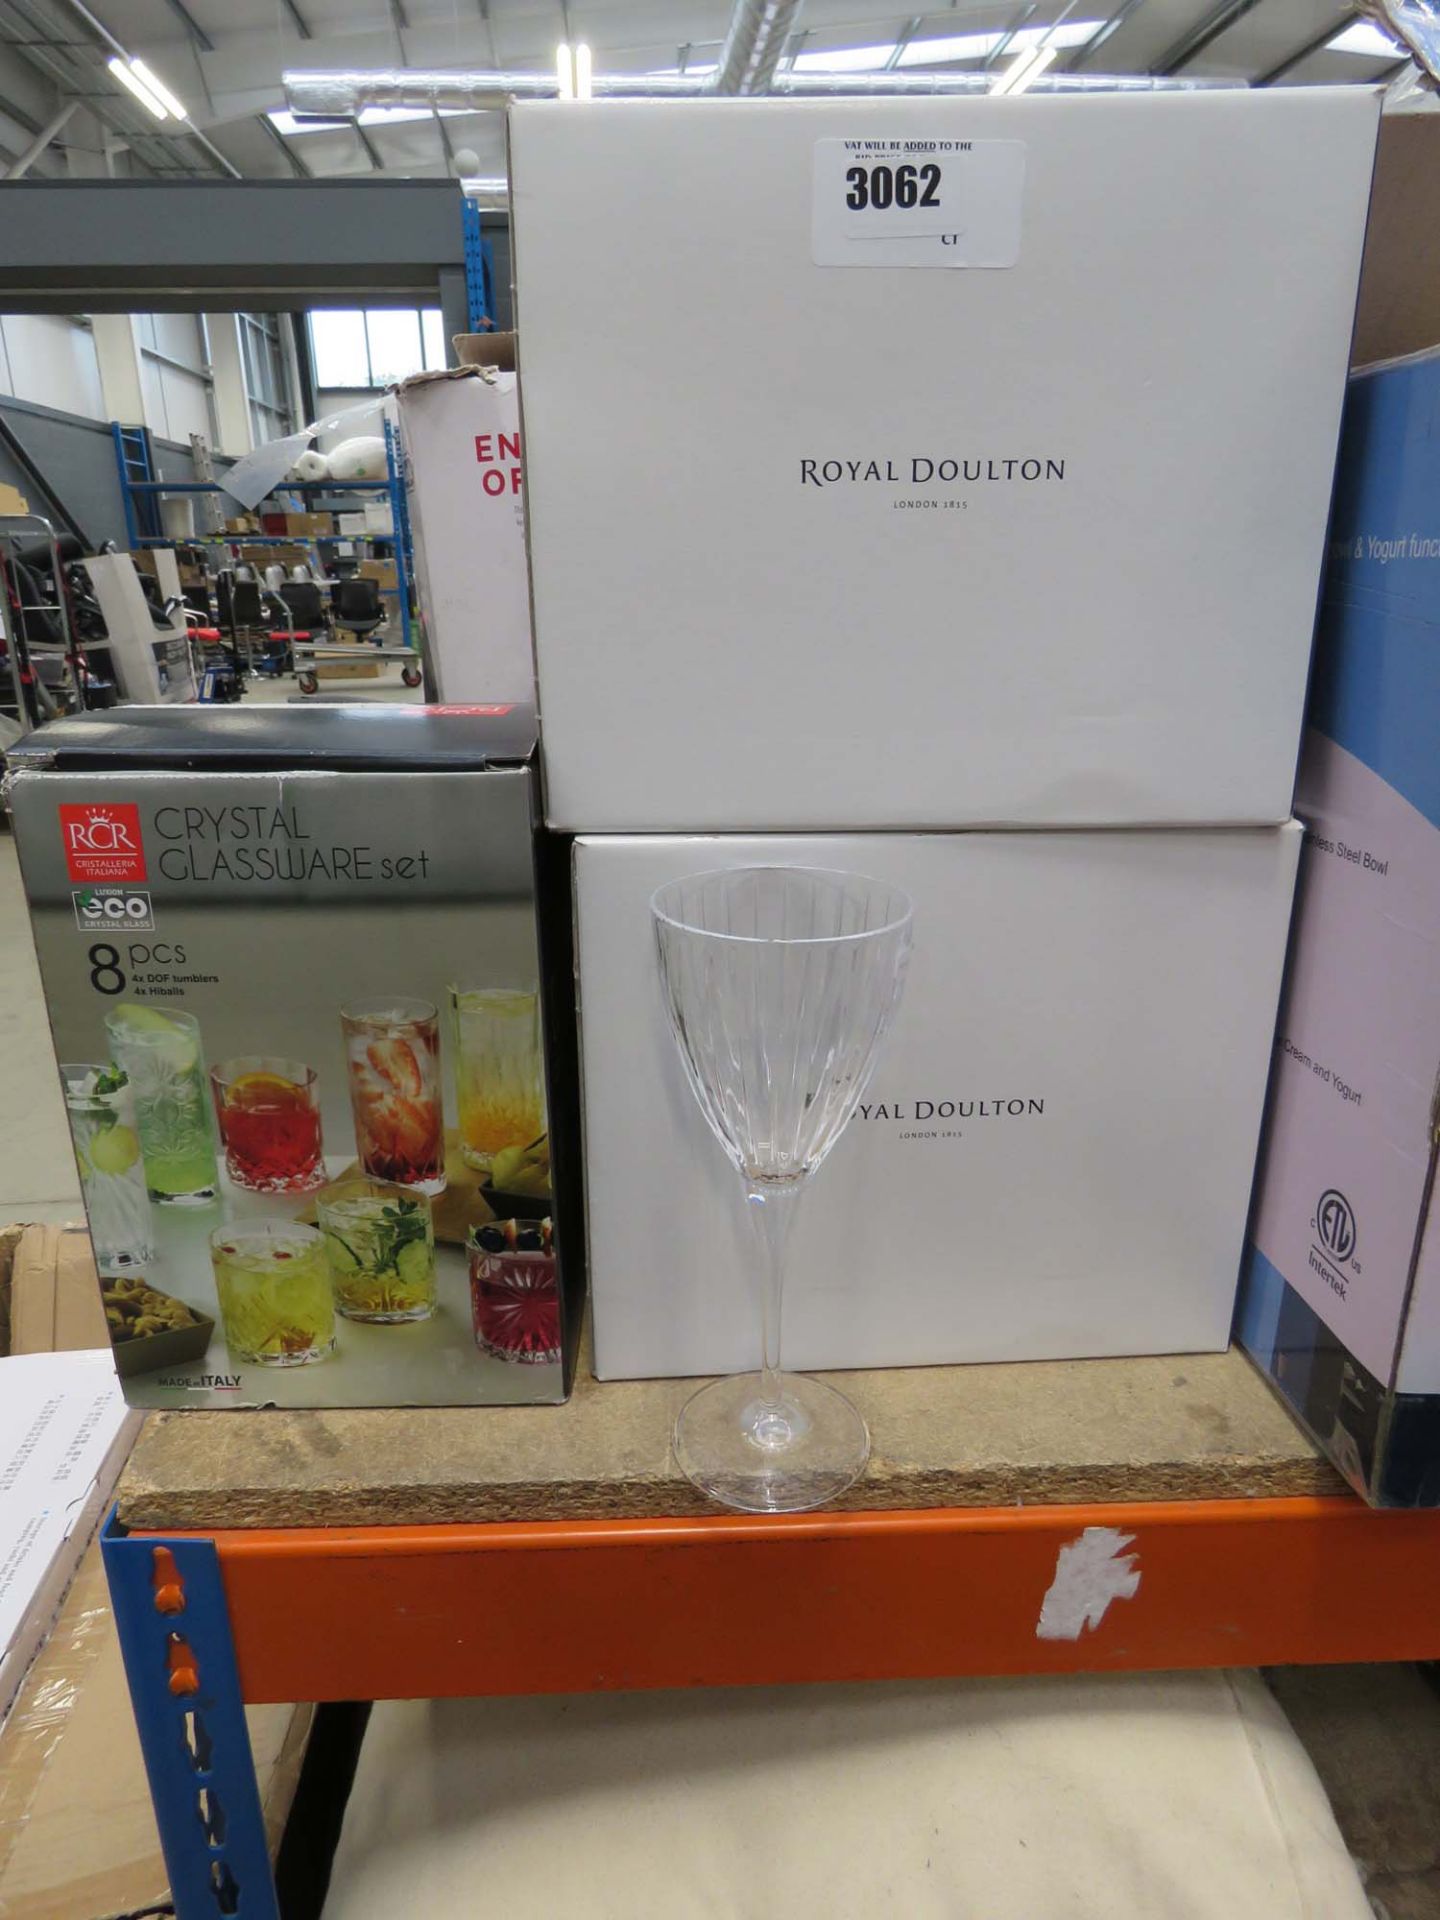 2 boxed Royal Doulton wine glass sets with box of RCR glassware